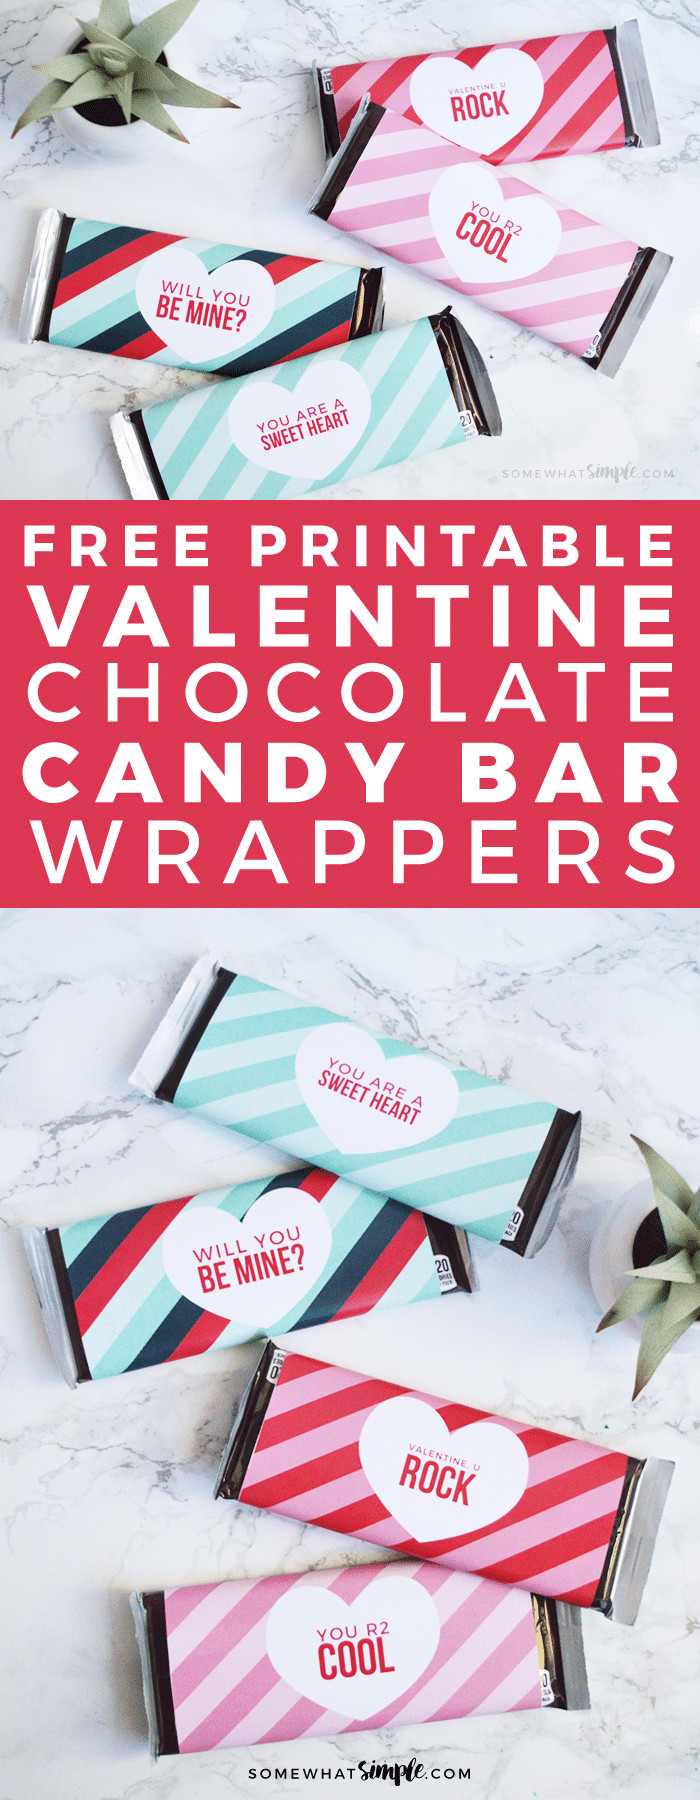 Printable Candy Bar Wrappers Valentine Candy Bar Wrappers Printable somewhat Simple